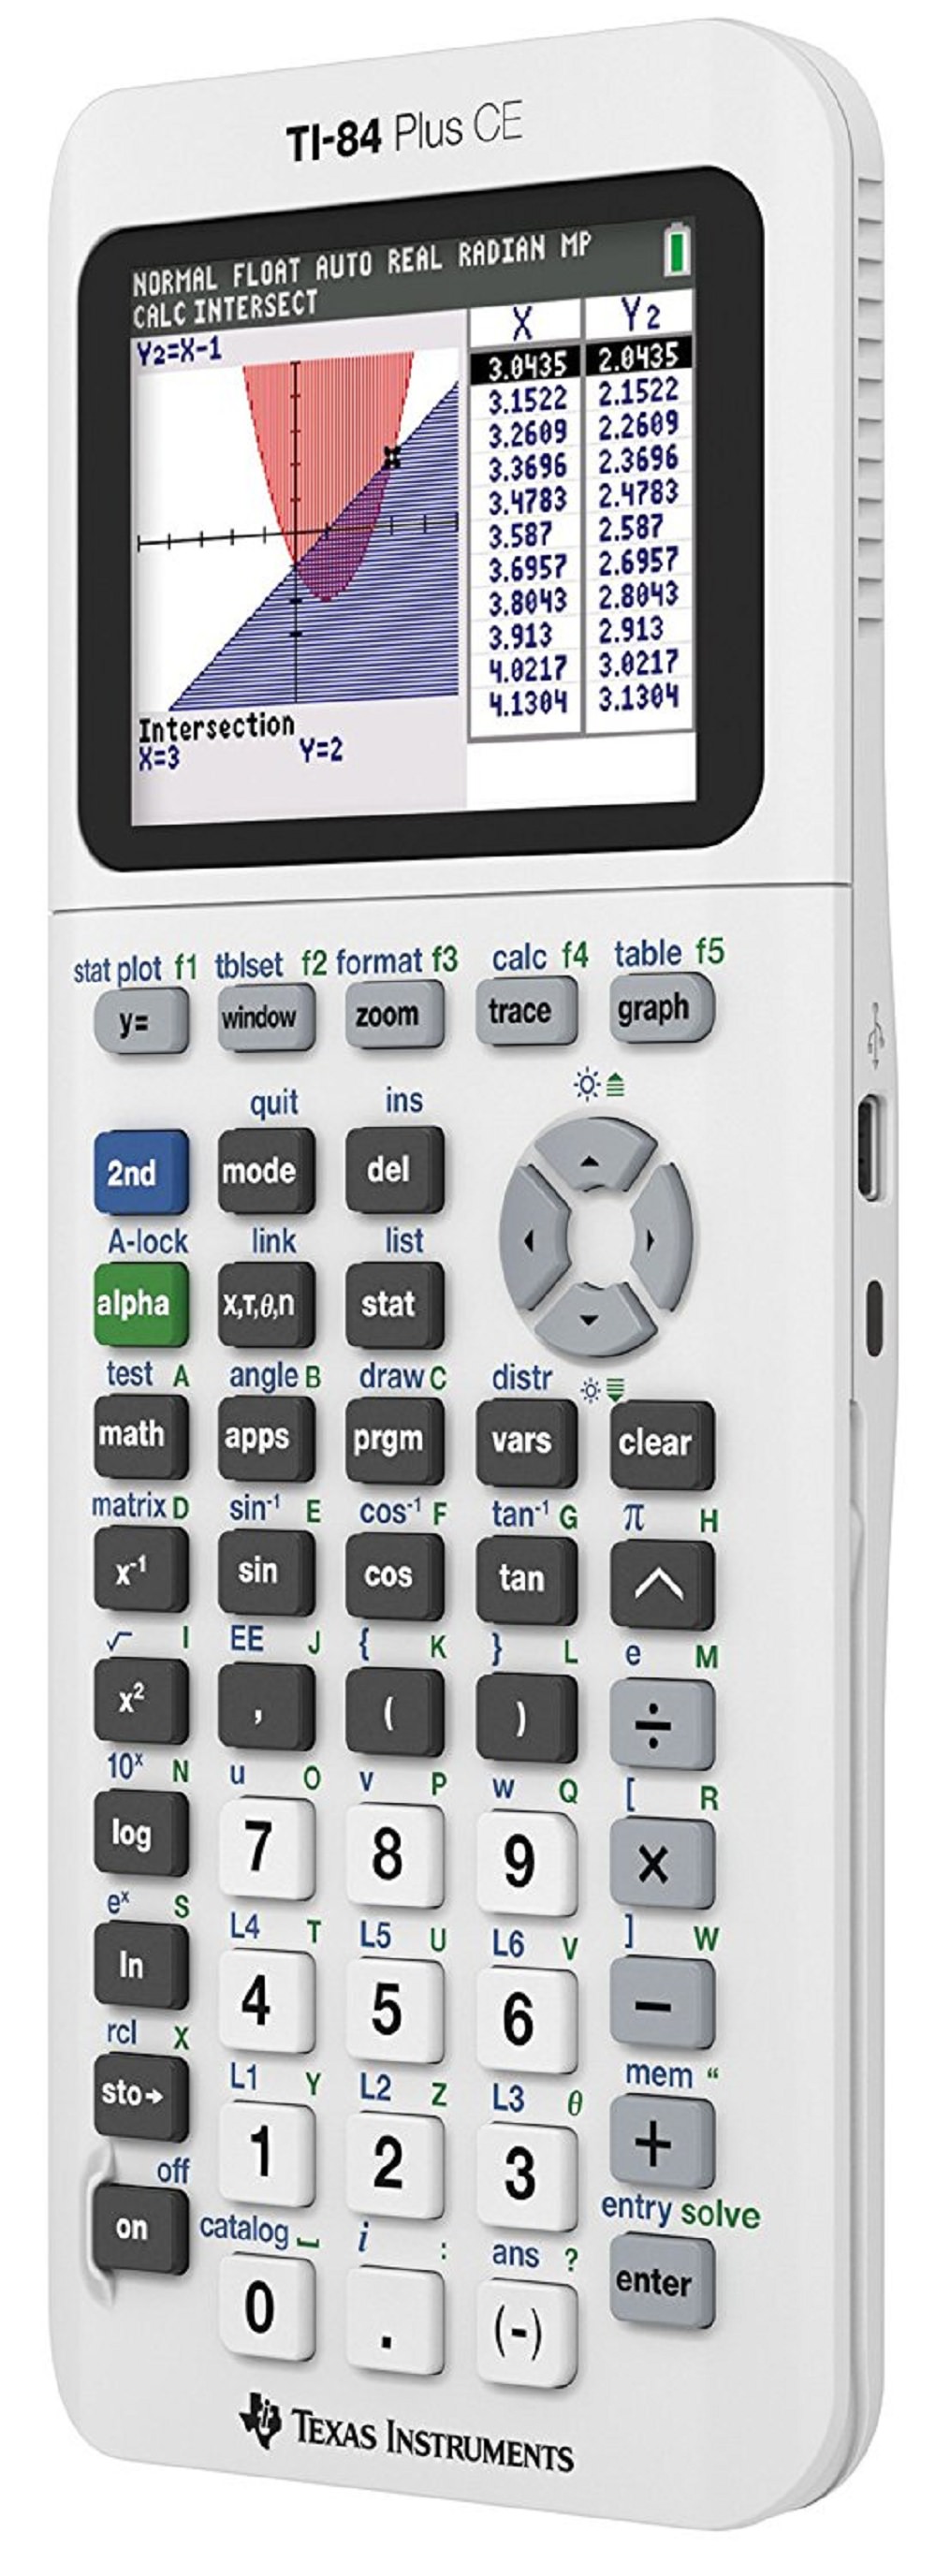 Texas Instruments TI-84 Plus CE Graphing Calculator, White - image 2 of 3